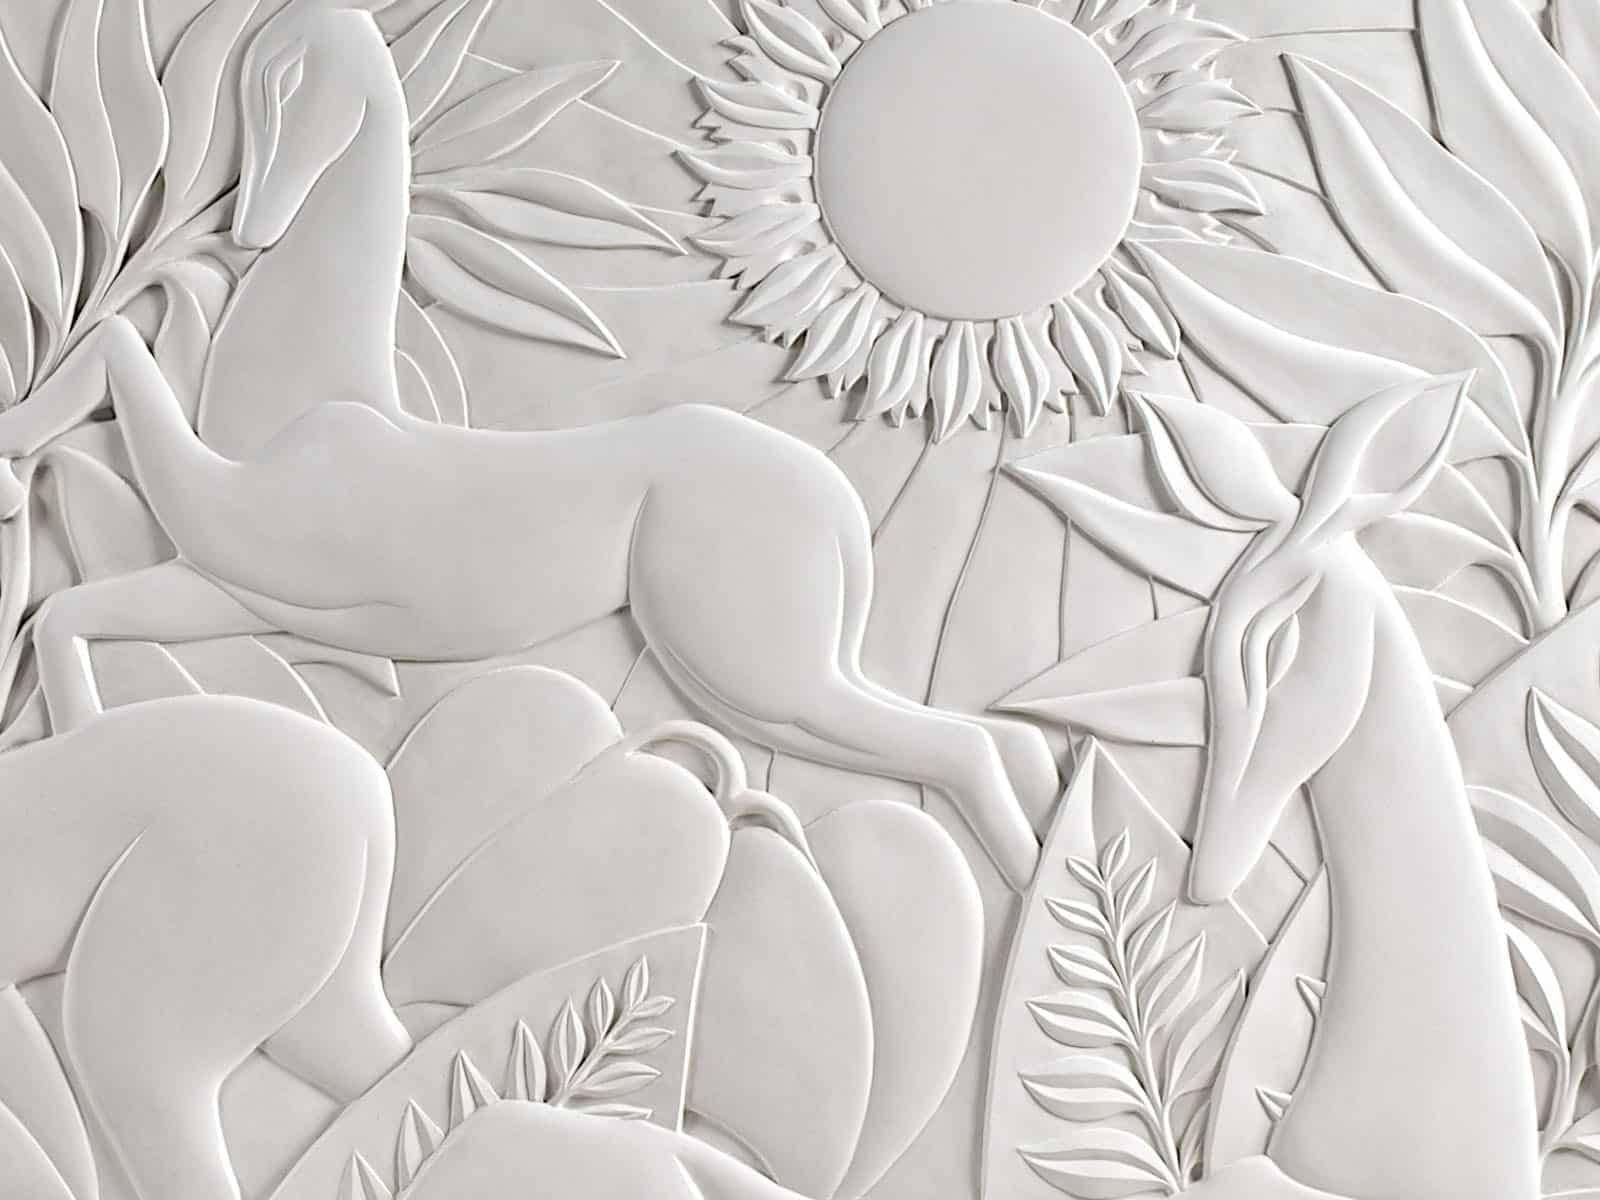 Polished, cast plaster bas-relief wall panel, detail, private motor yacht. | DESIGN: Winch Design | PHOTO: © DKT Artworks